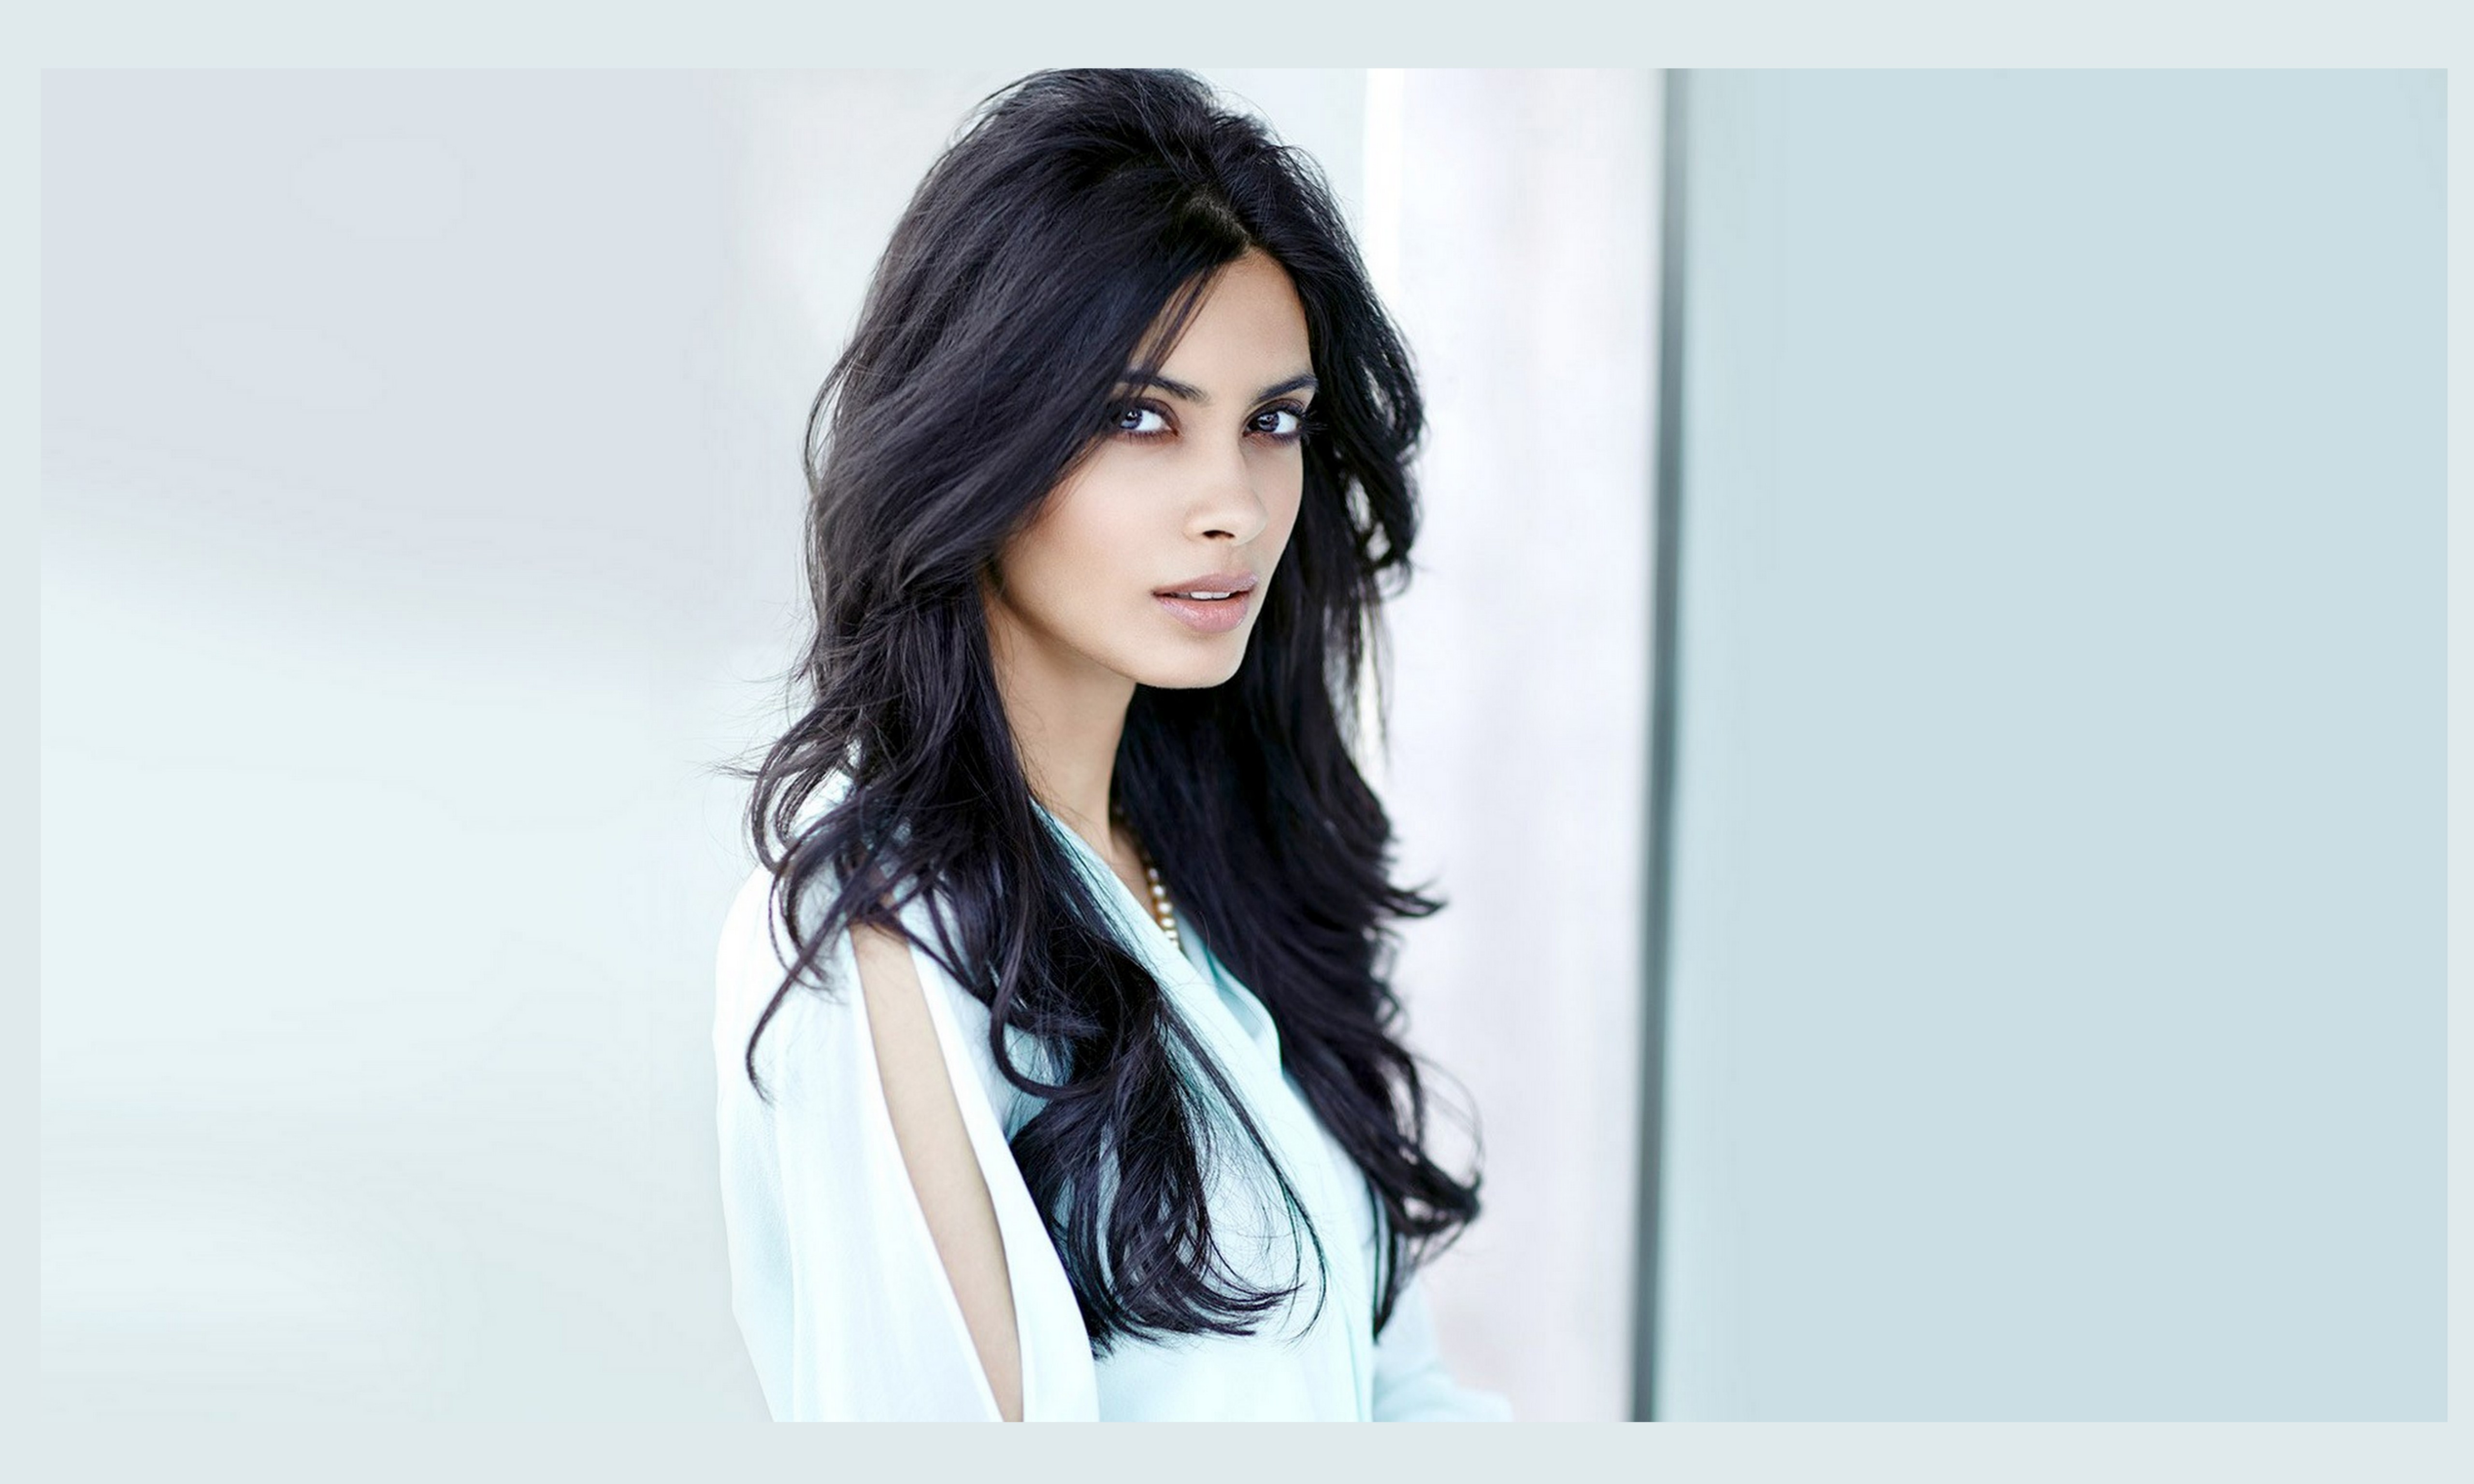 If the role is powerful, screen time doesn't bother me: Diana Penty!